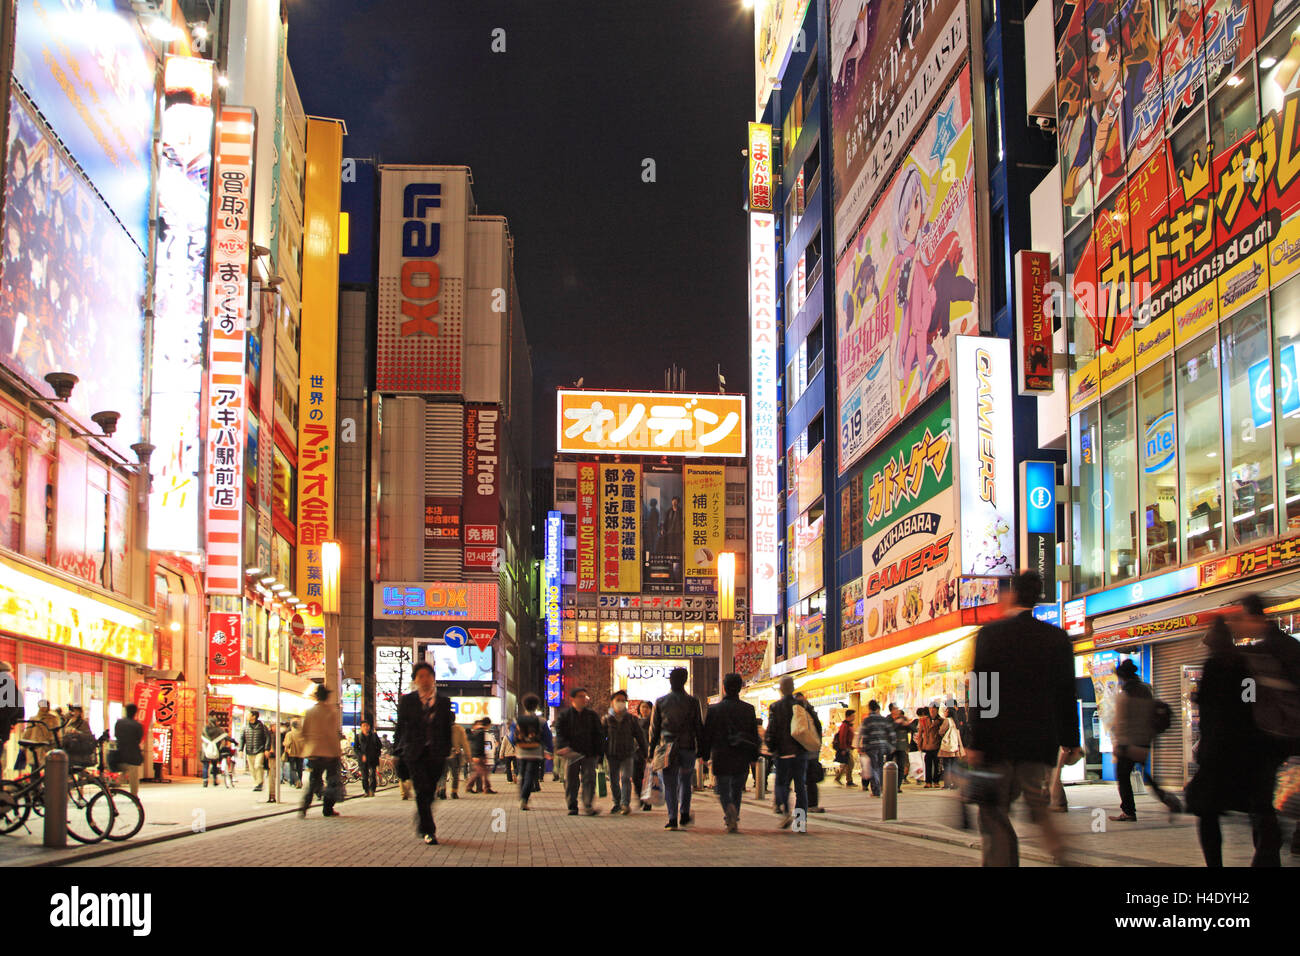 Tokyo City Lights Akihabara Electric Town At Night Knows For Shops  Dedicated To Anime Manga Videogames And Other Products Of Japanese Otaku  Culture Stock Photo Picture And Royalty Free Image Image 134997180